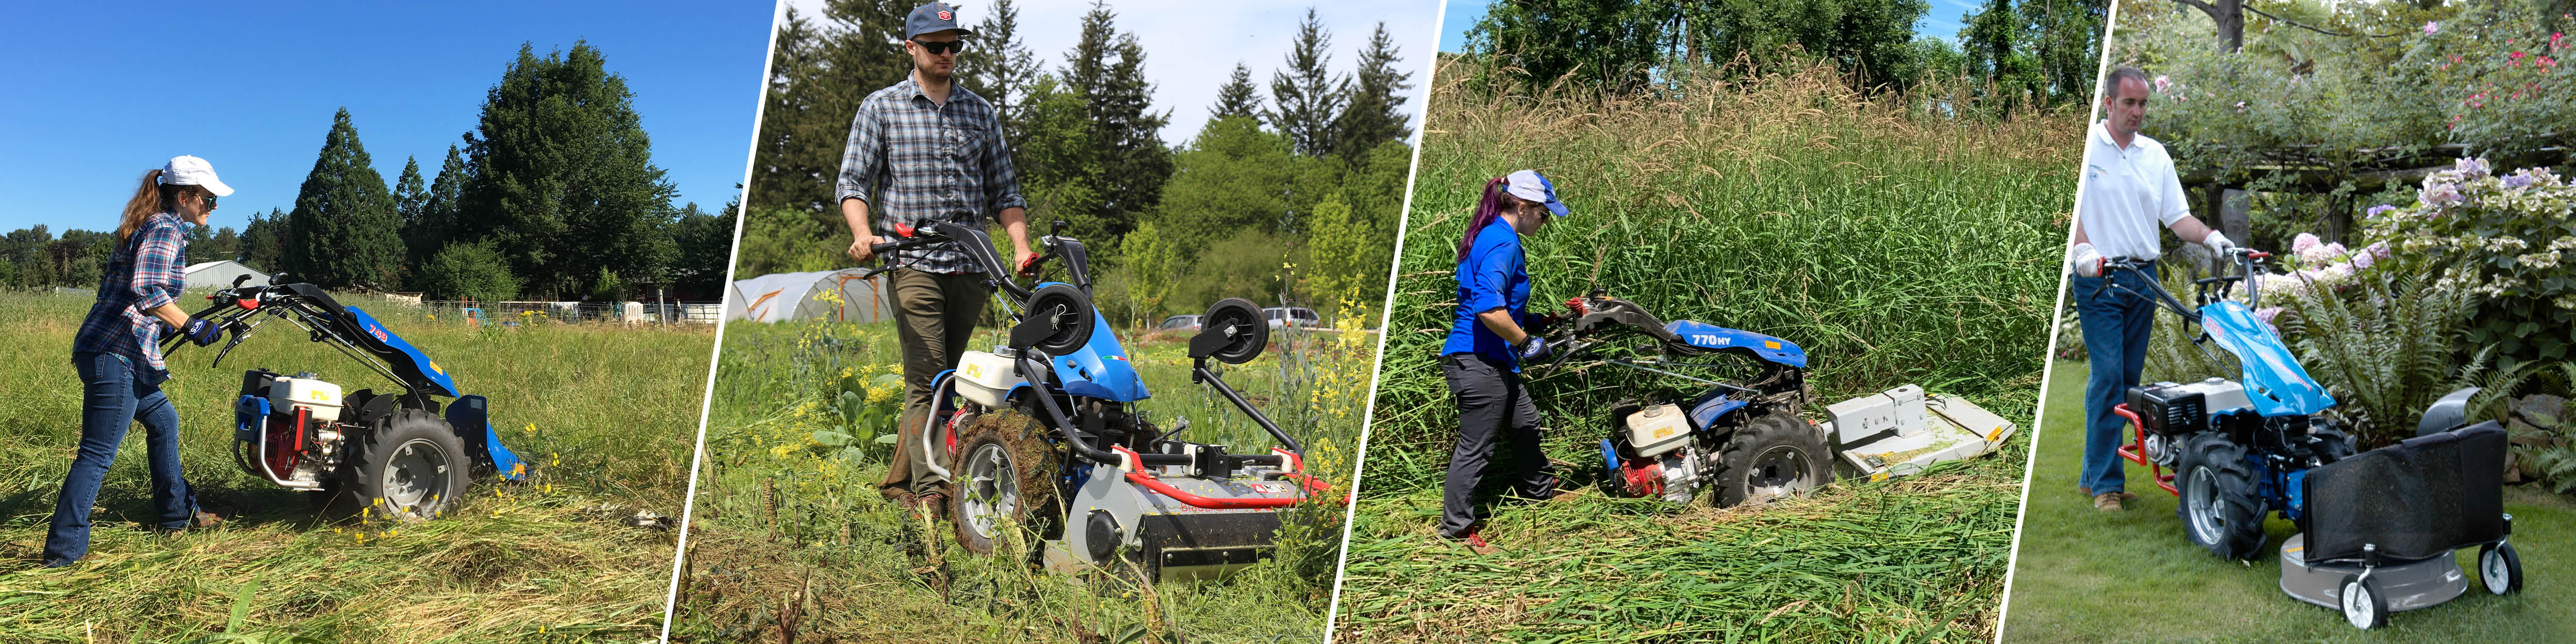 Two-Wheel Tractors Can Mow Anywhere